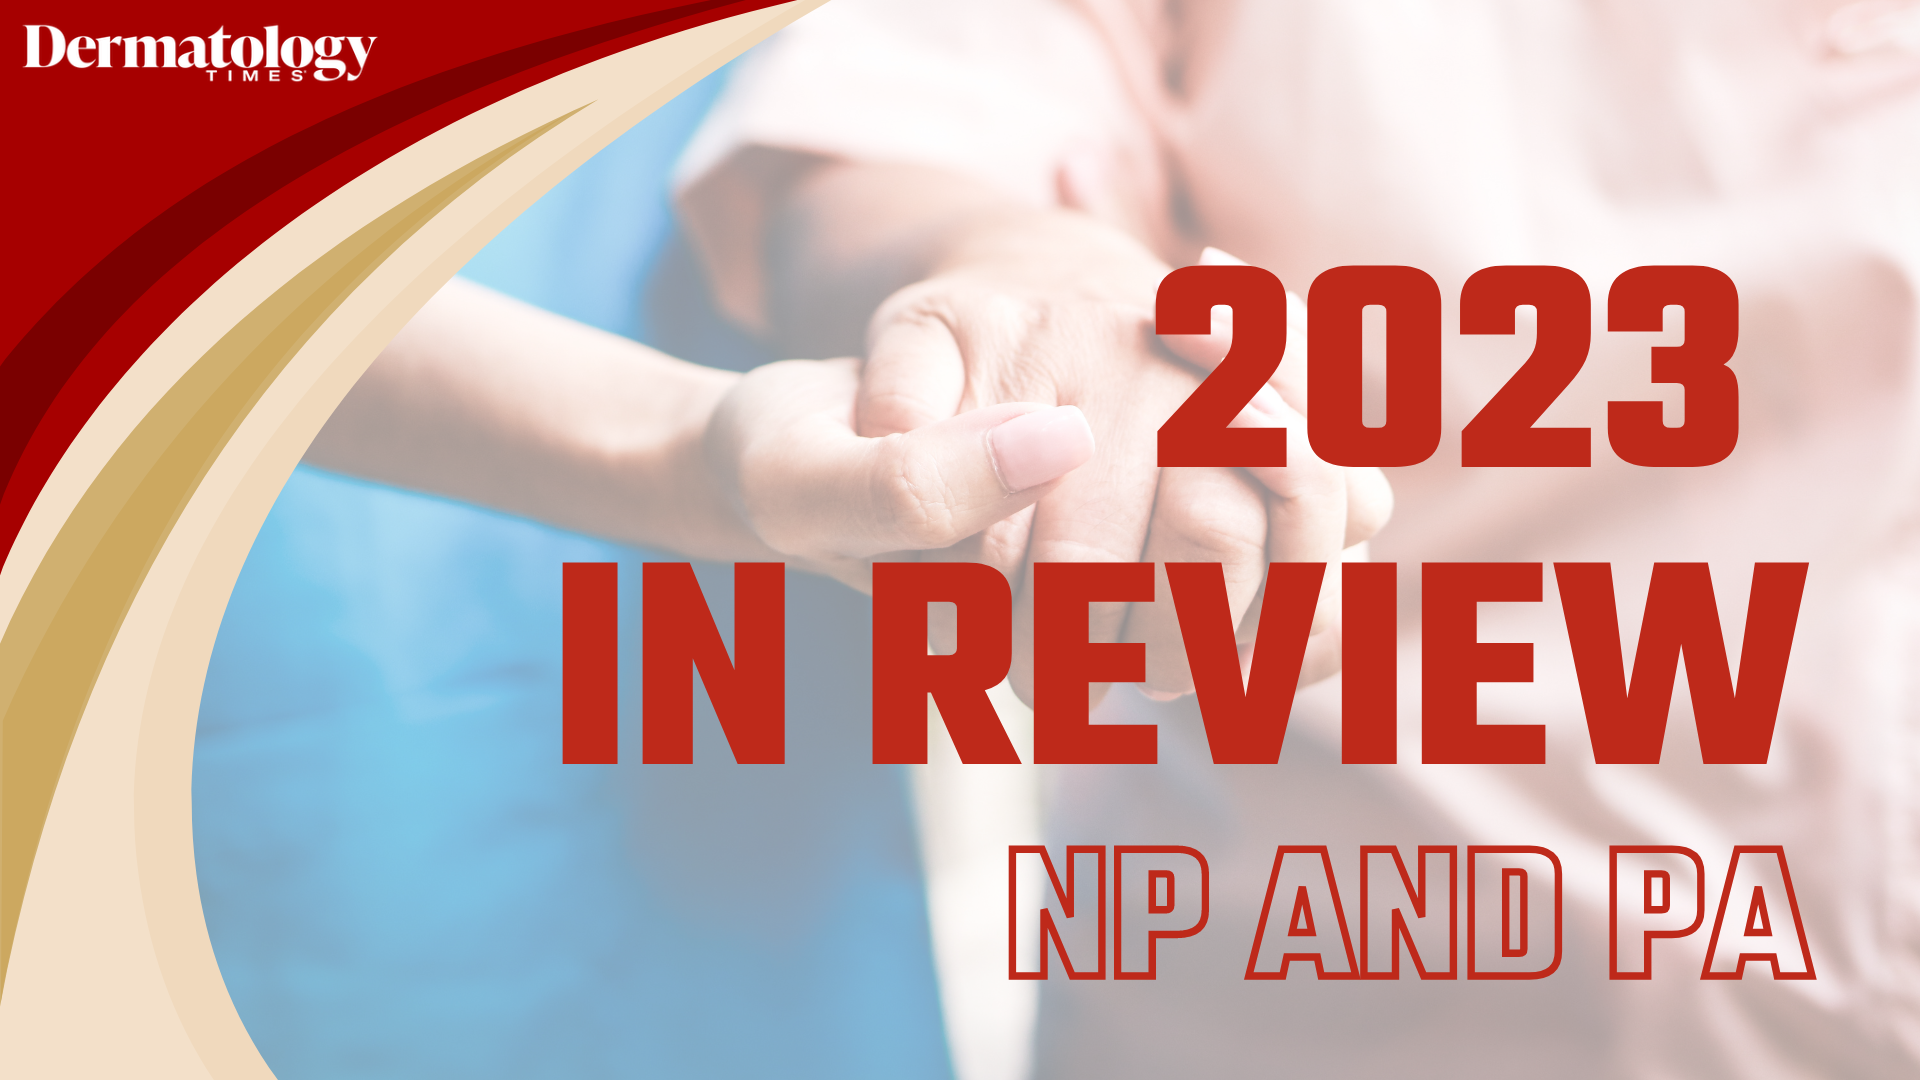 Dermatology Times 2023 In Review: NP and PA News